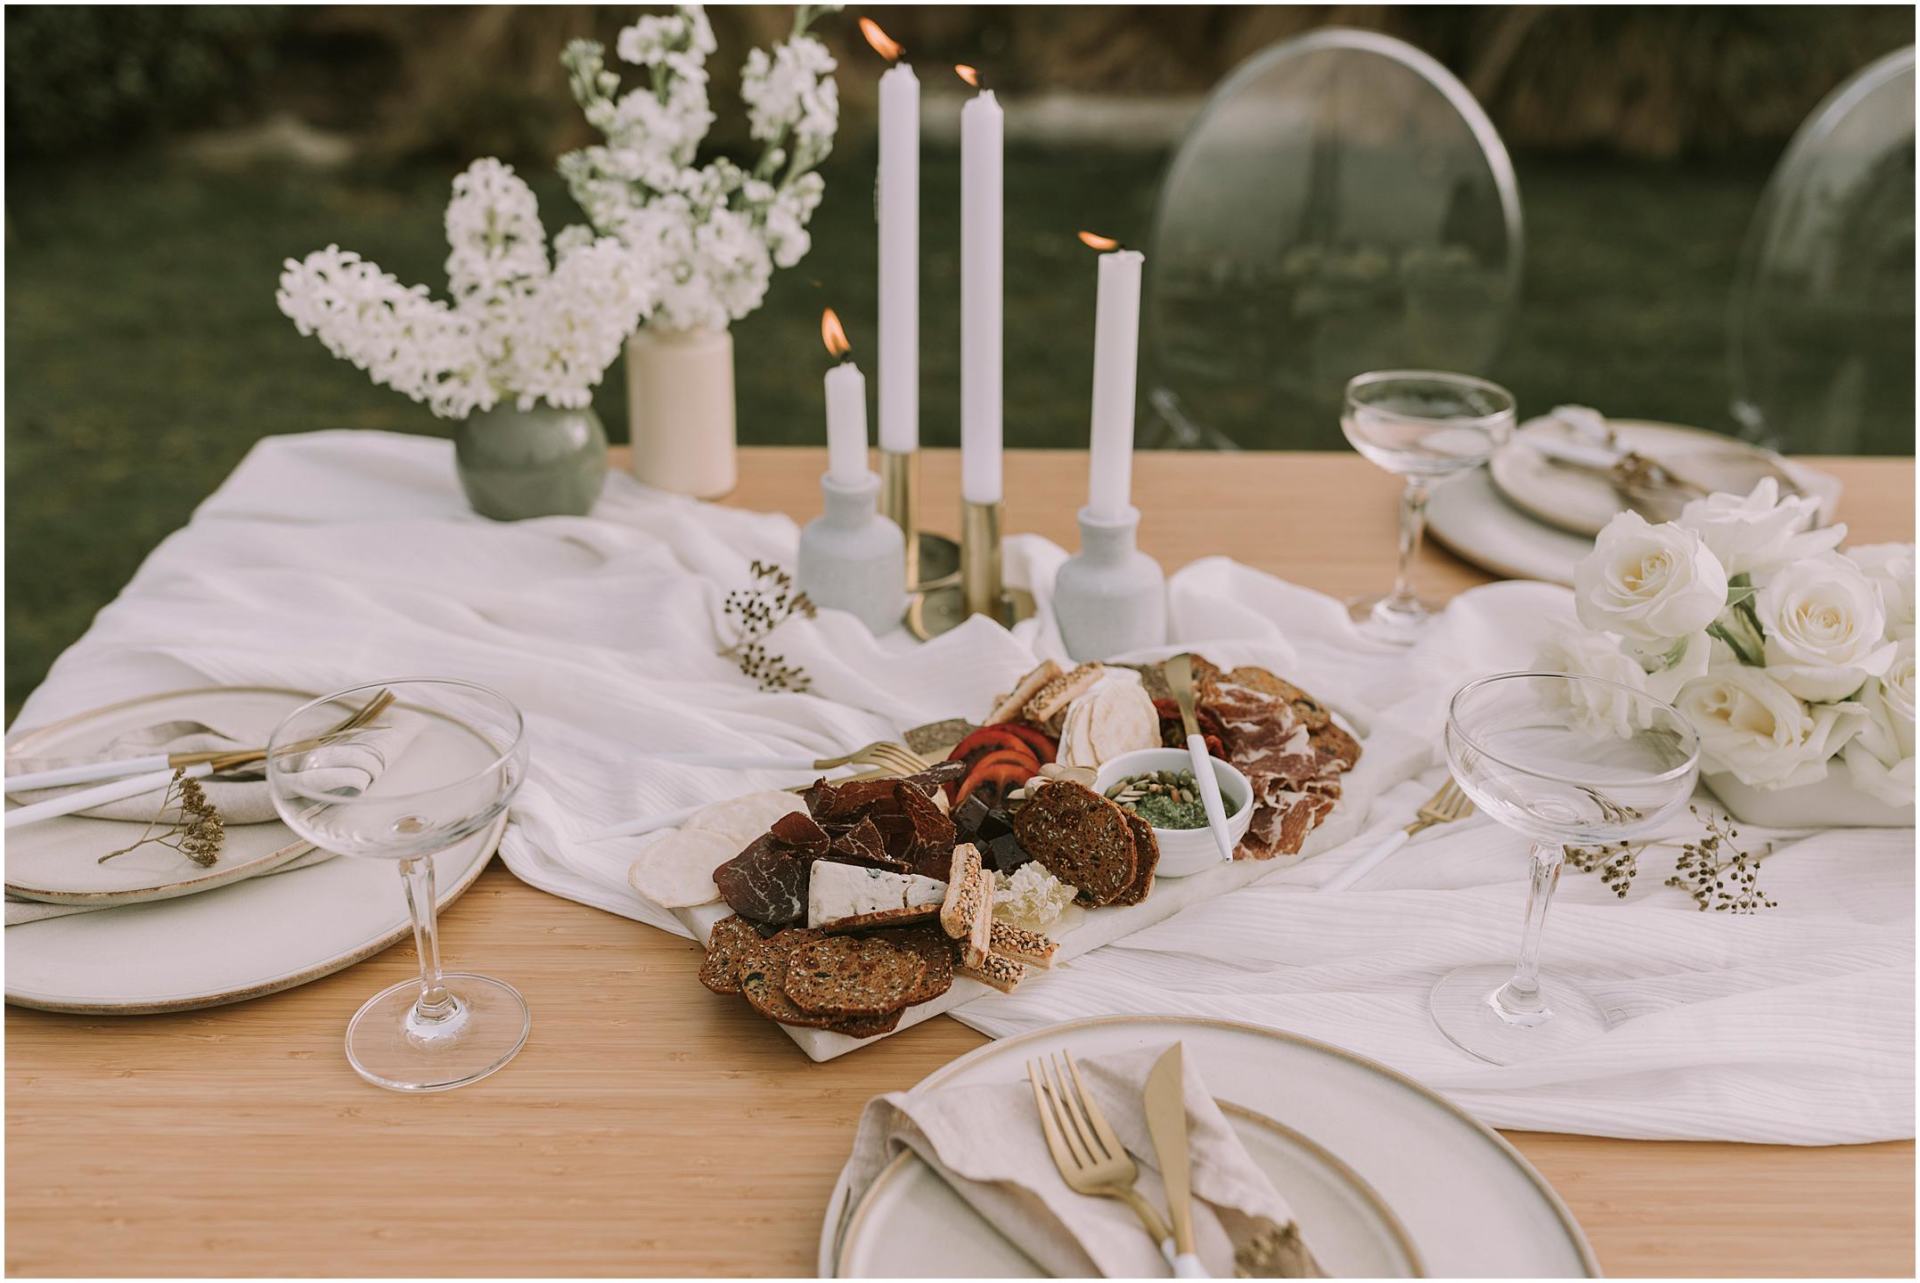 Charlotte Kiri Photography - Wedding Photography of a table setting with white floral arrangements and candles, a cheese board with cured meats, crackers, and place settings with champagne glasses and a damask-striped table runner in Wanaka, New Zealand.